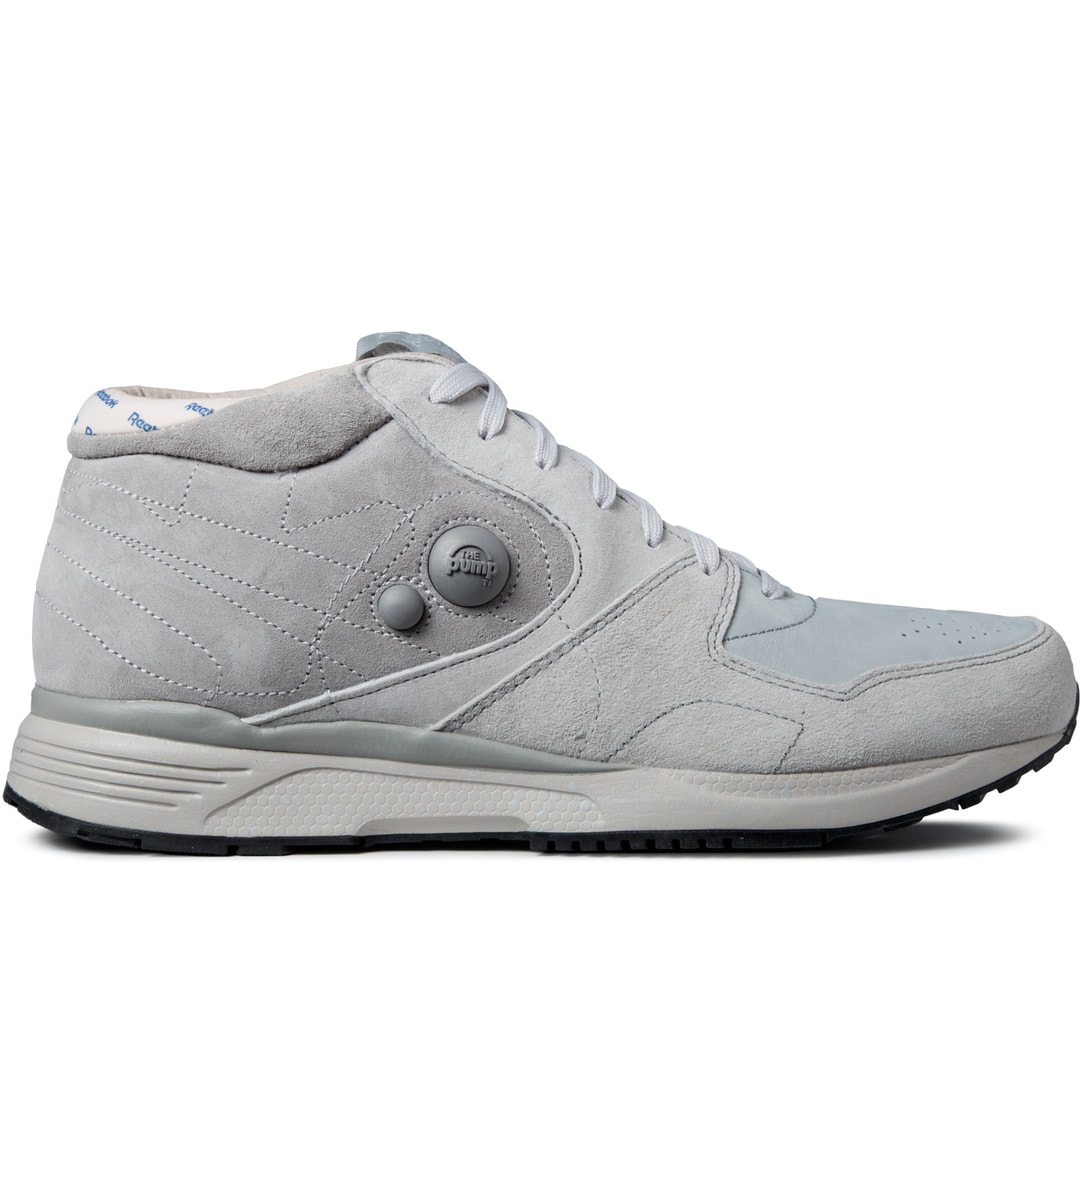 Reebok - Garbstore x Reebok Carbon/Steel/Grey M43012 GS Pump Running Dual Shoes | HBX - Globally Fashion and Lifestyle by Hypebeast